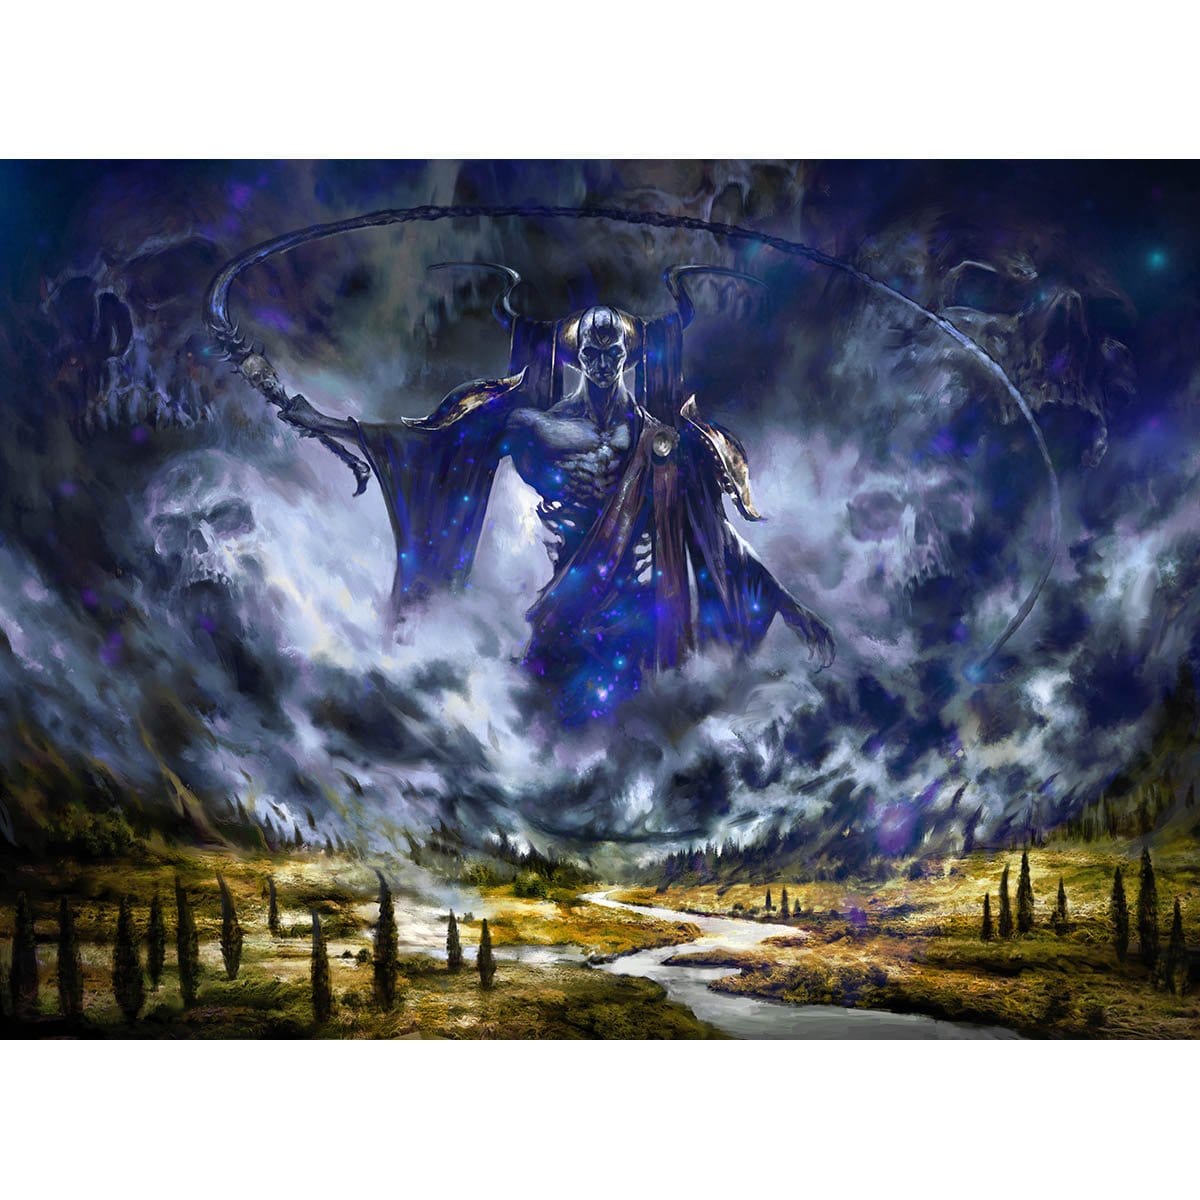 Erebos's Intervention Print - Print - Original Magic Art - Accessories for Magic the Gathering and other card games